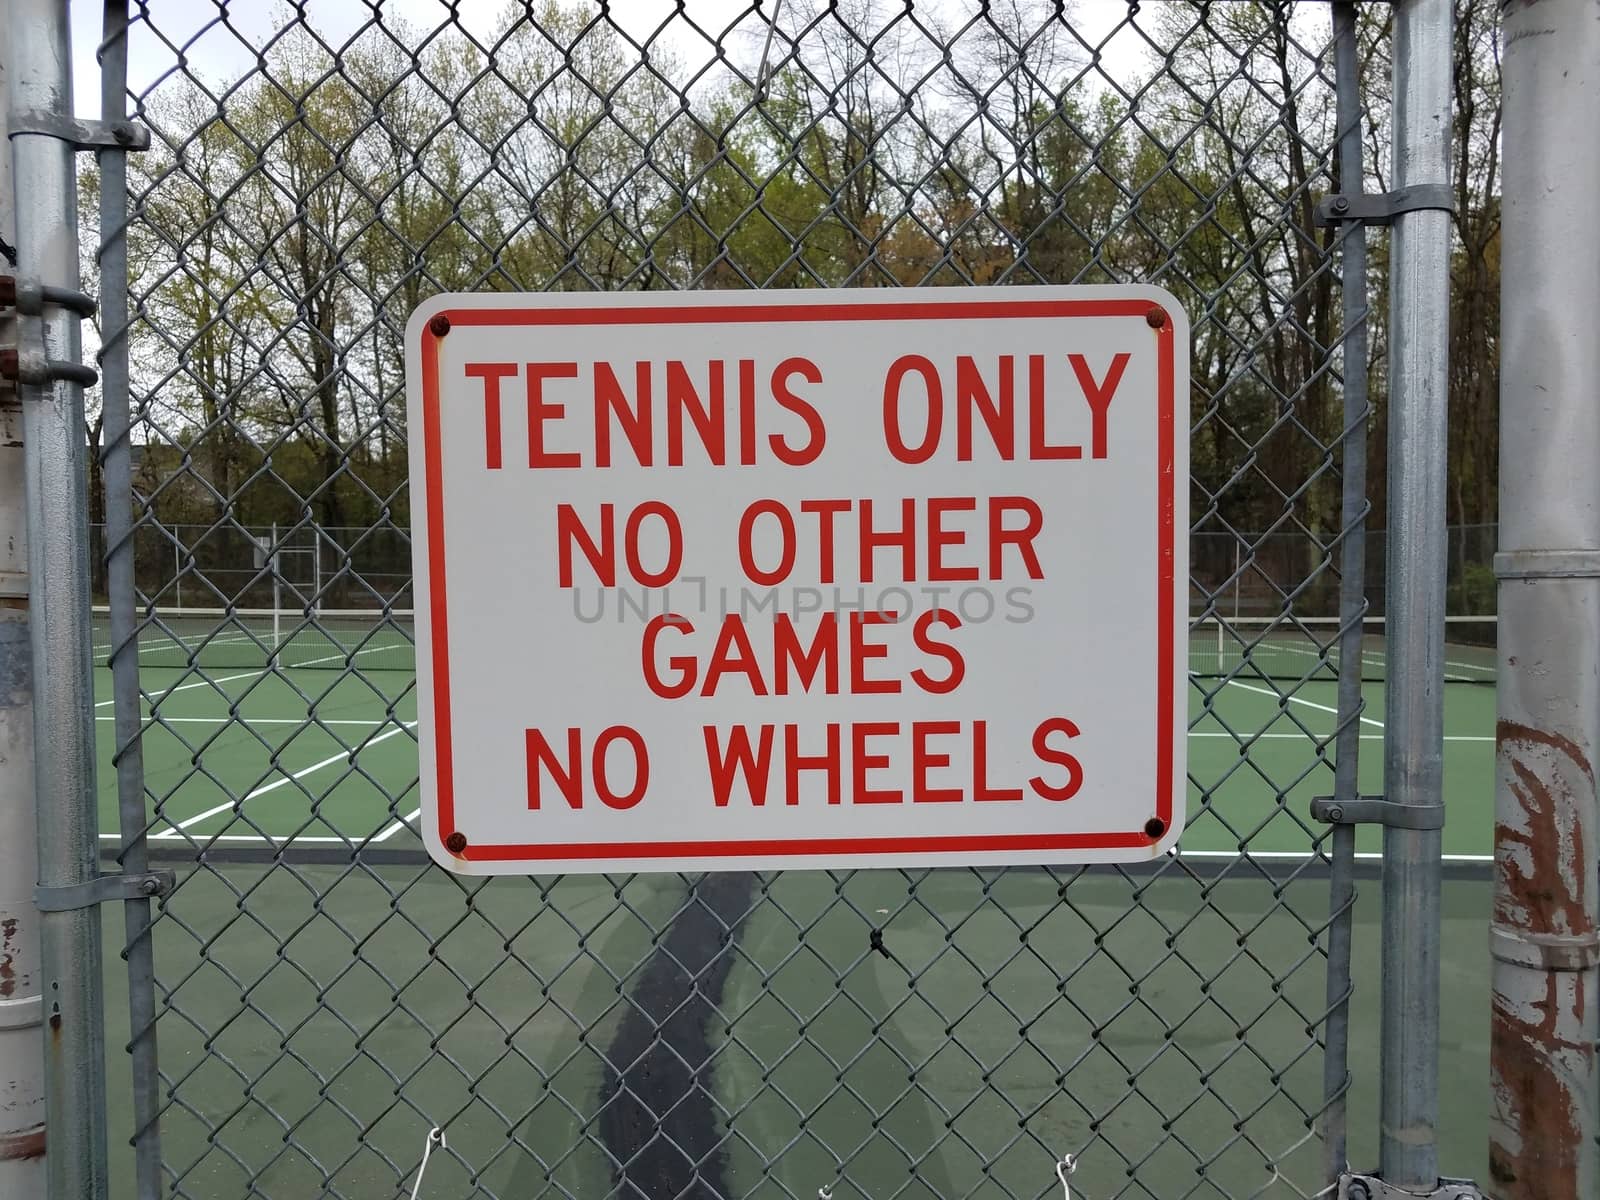 tennis only no other games no wheels sign on metal fence at tennis court by stockphotofan1